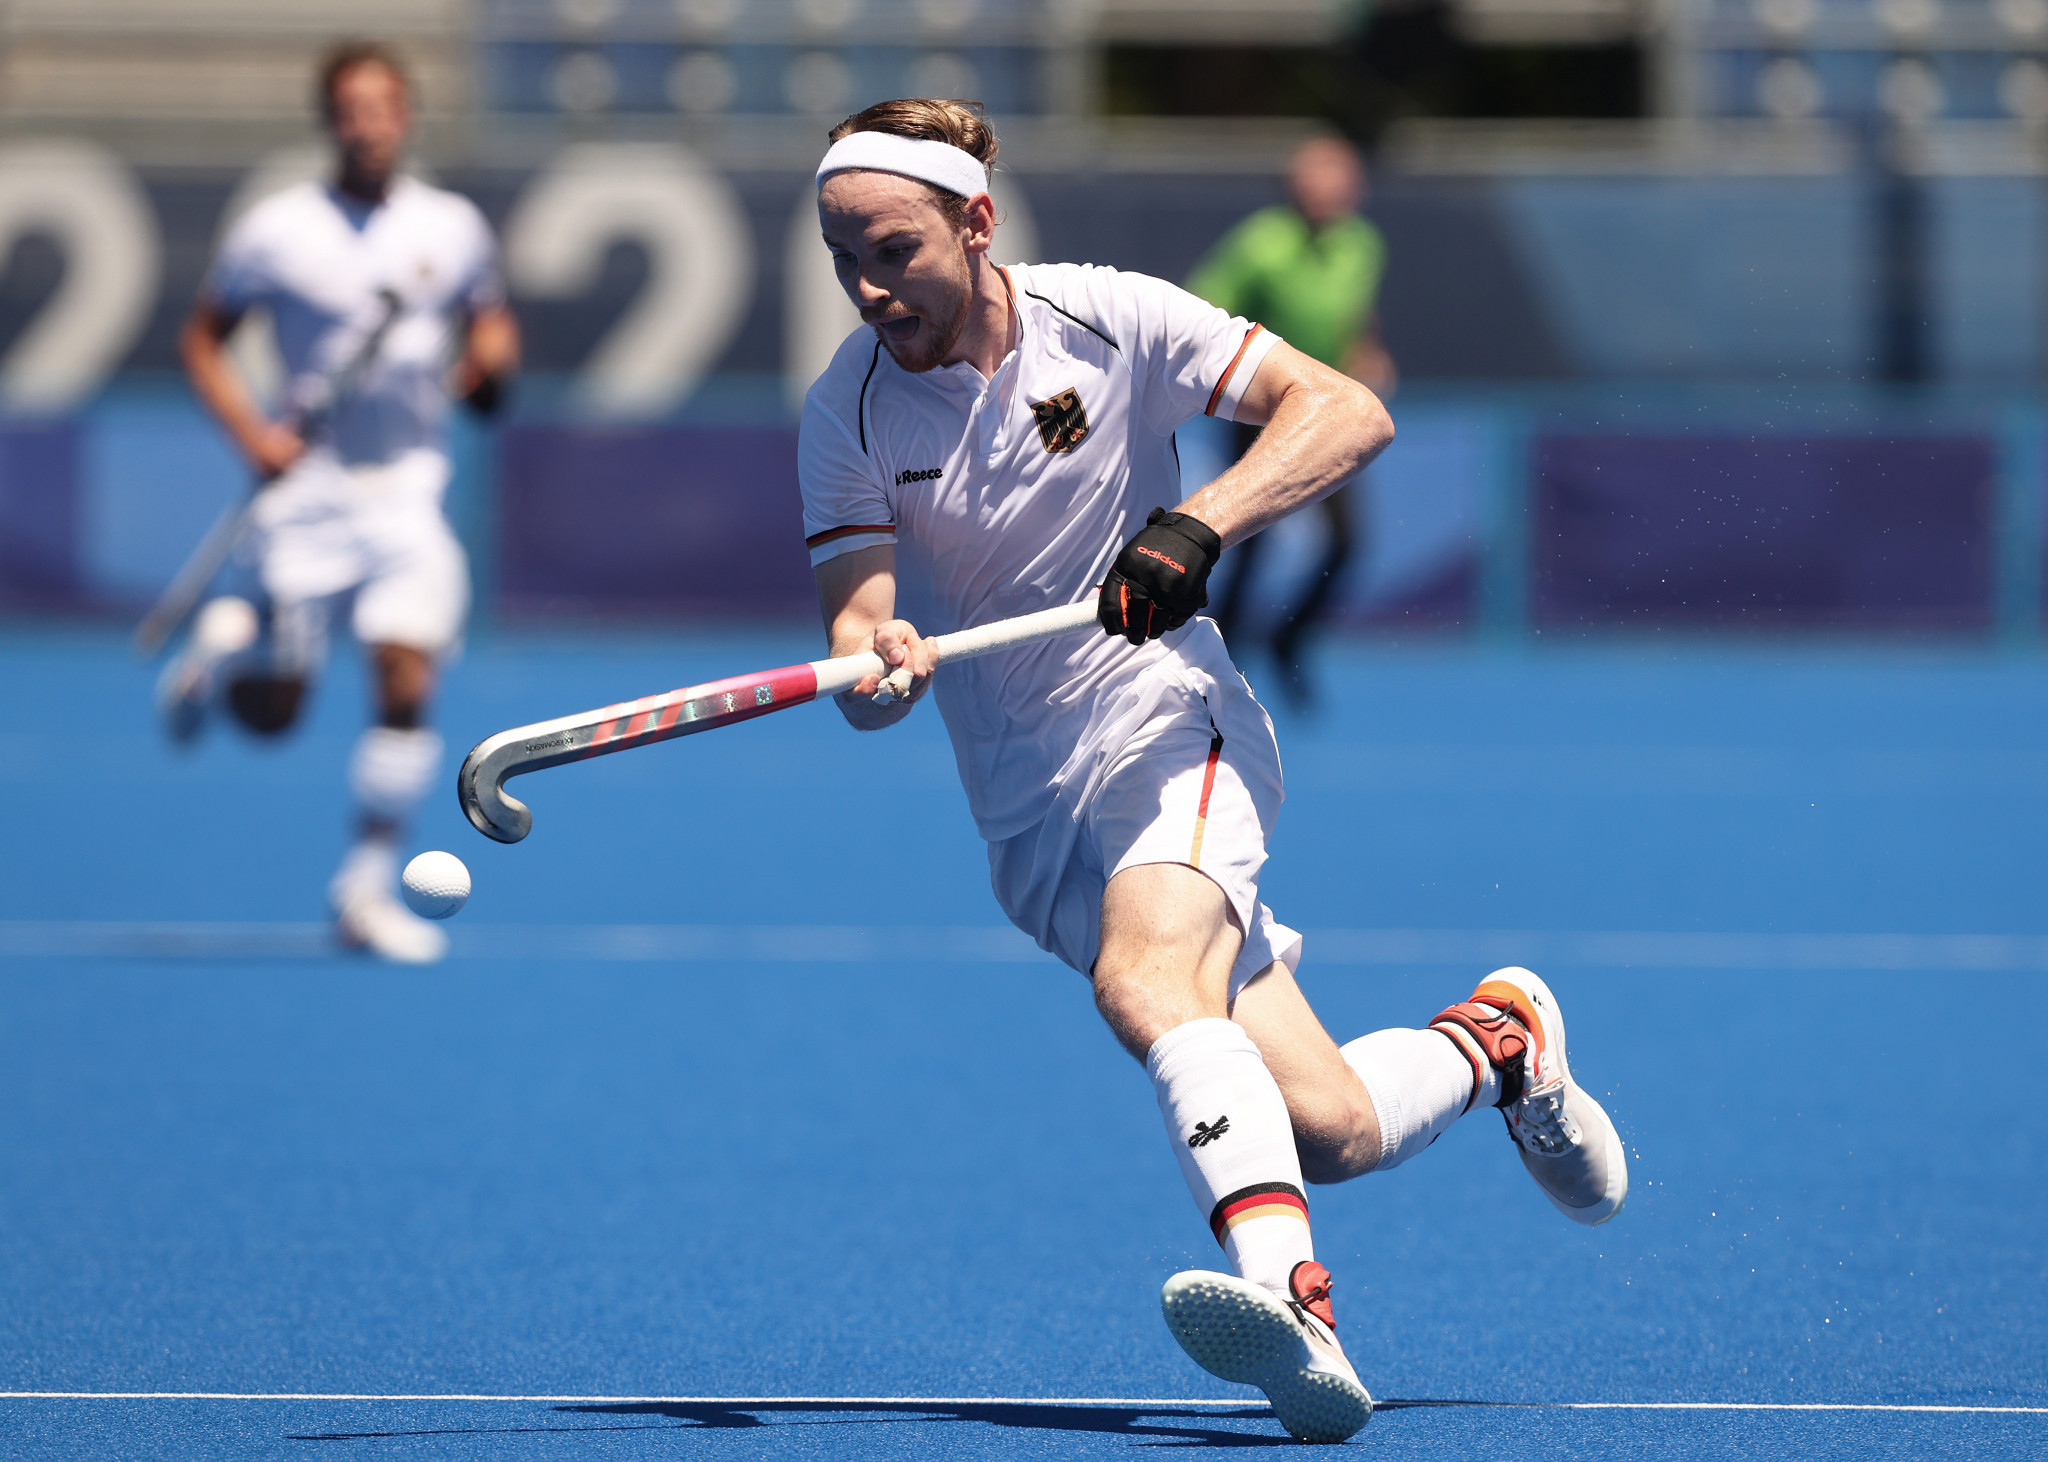 Germany see off South Africa for fourth Hockey Pro League win in a row